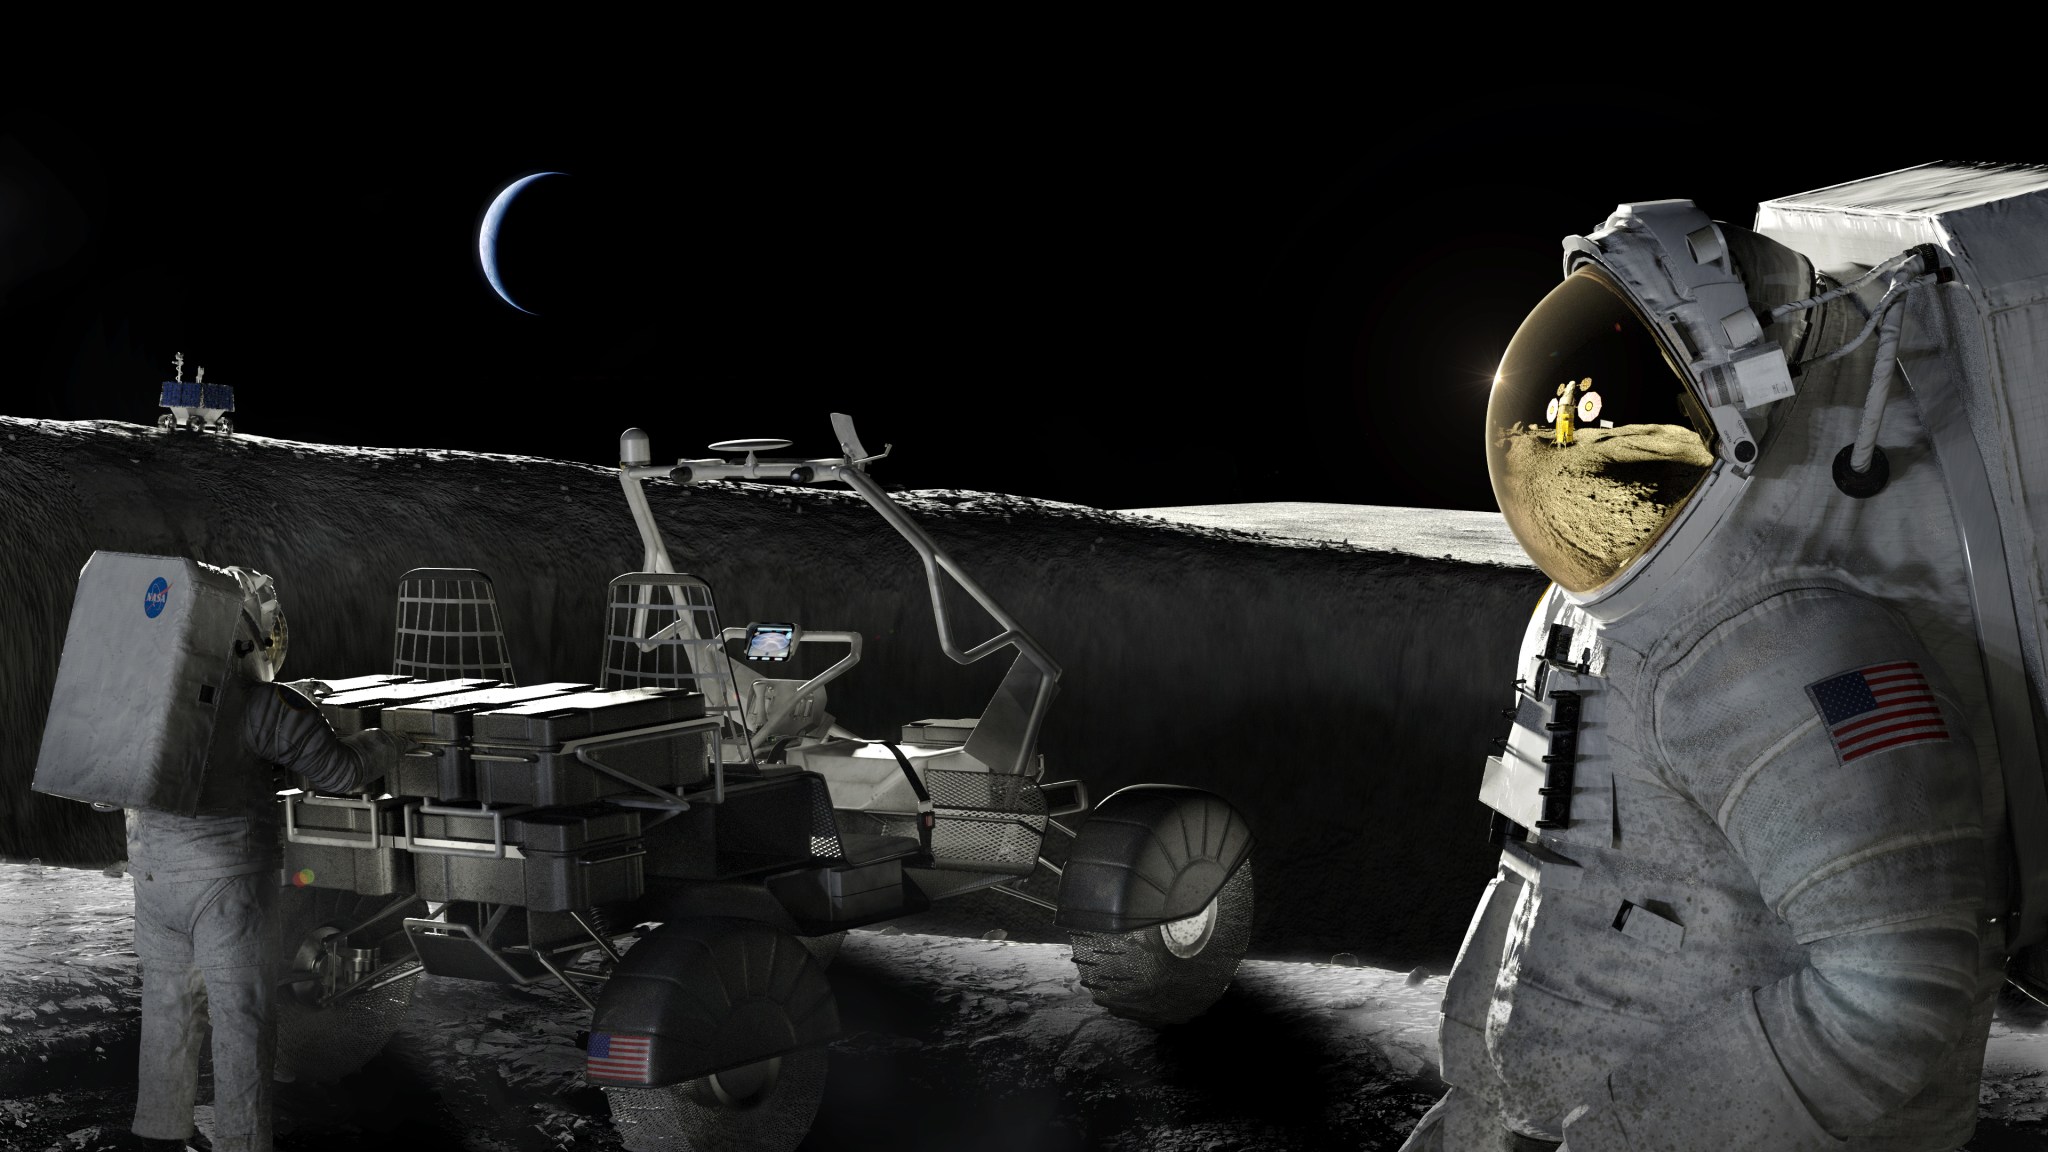 Two astronauts on the moon unloading cargo from a rover